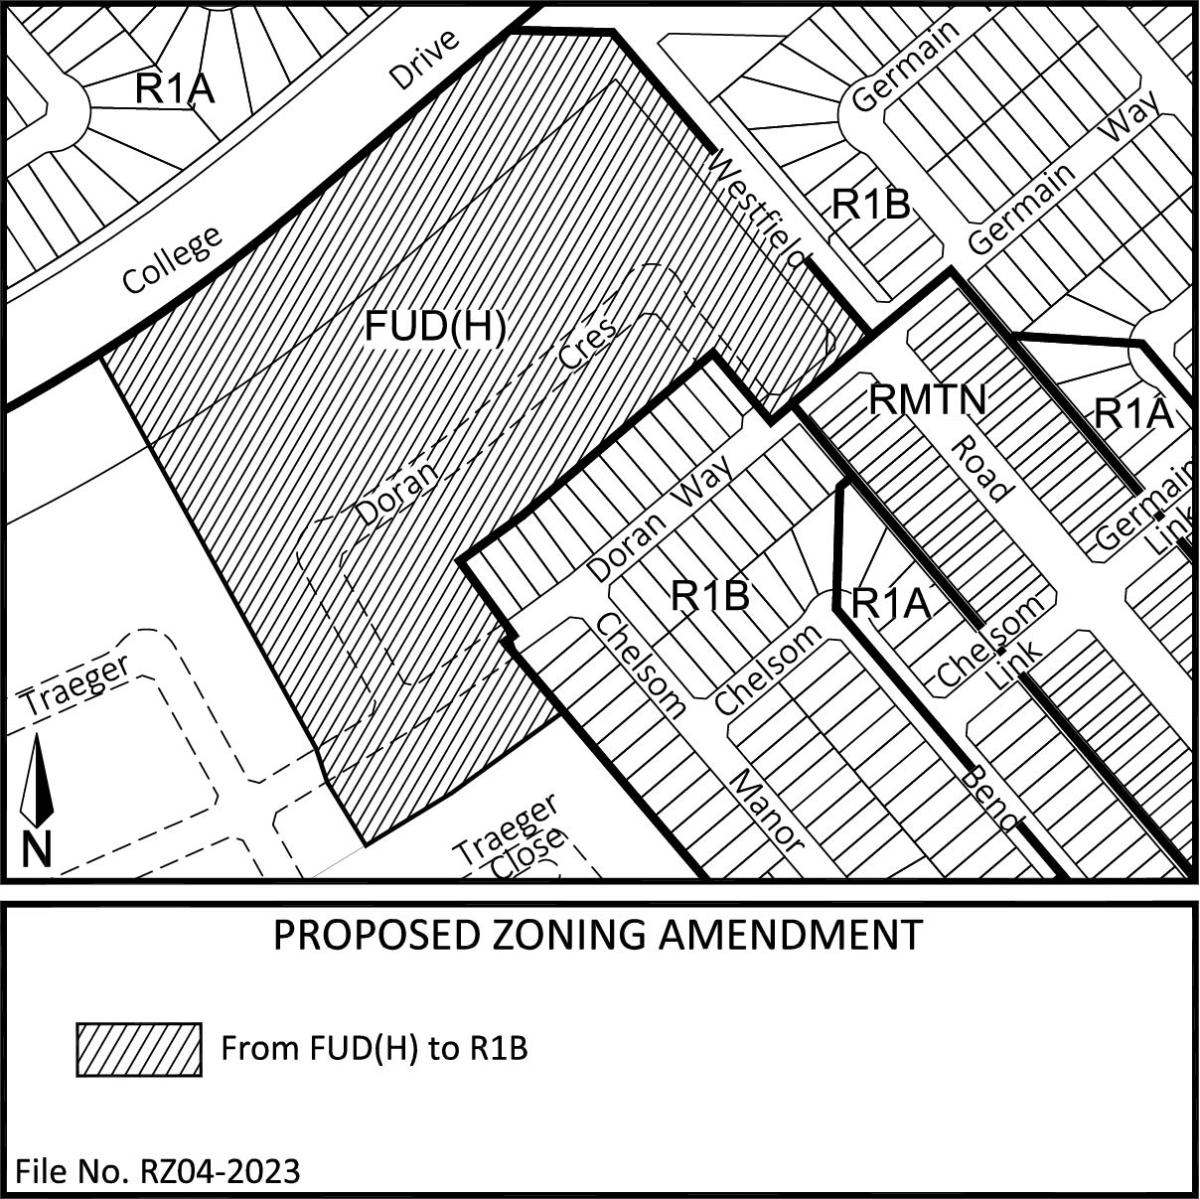 Location Map - Proposed Rezoning